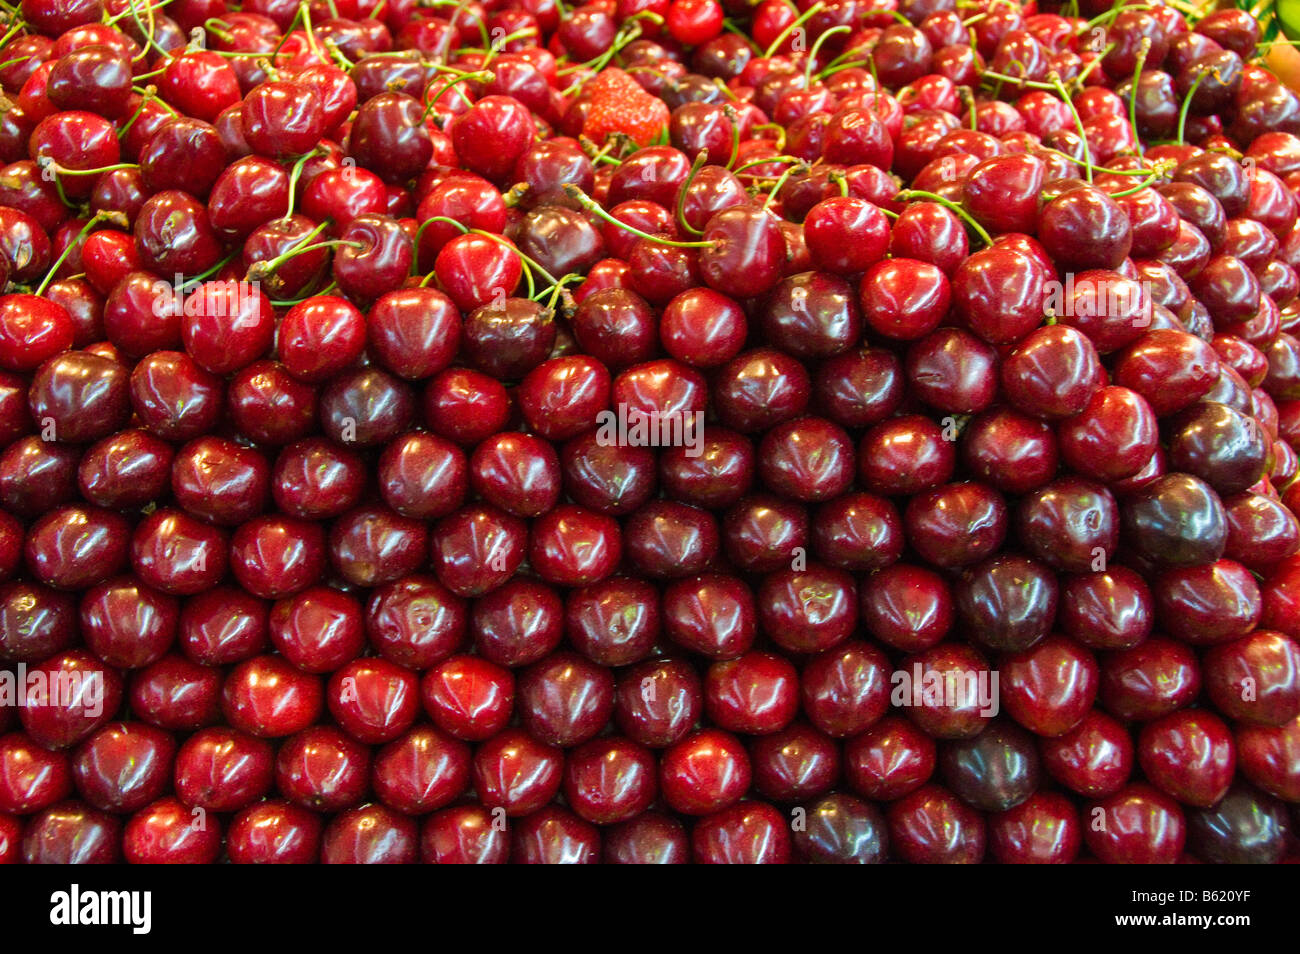 Cherries on sale at the covered market of Niort Deux Sèvres France Stock Photo